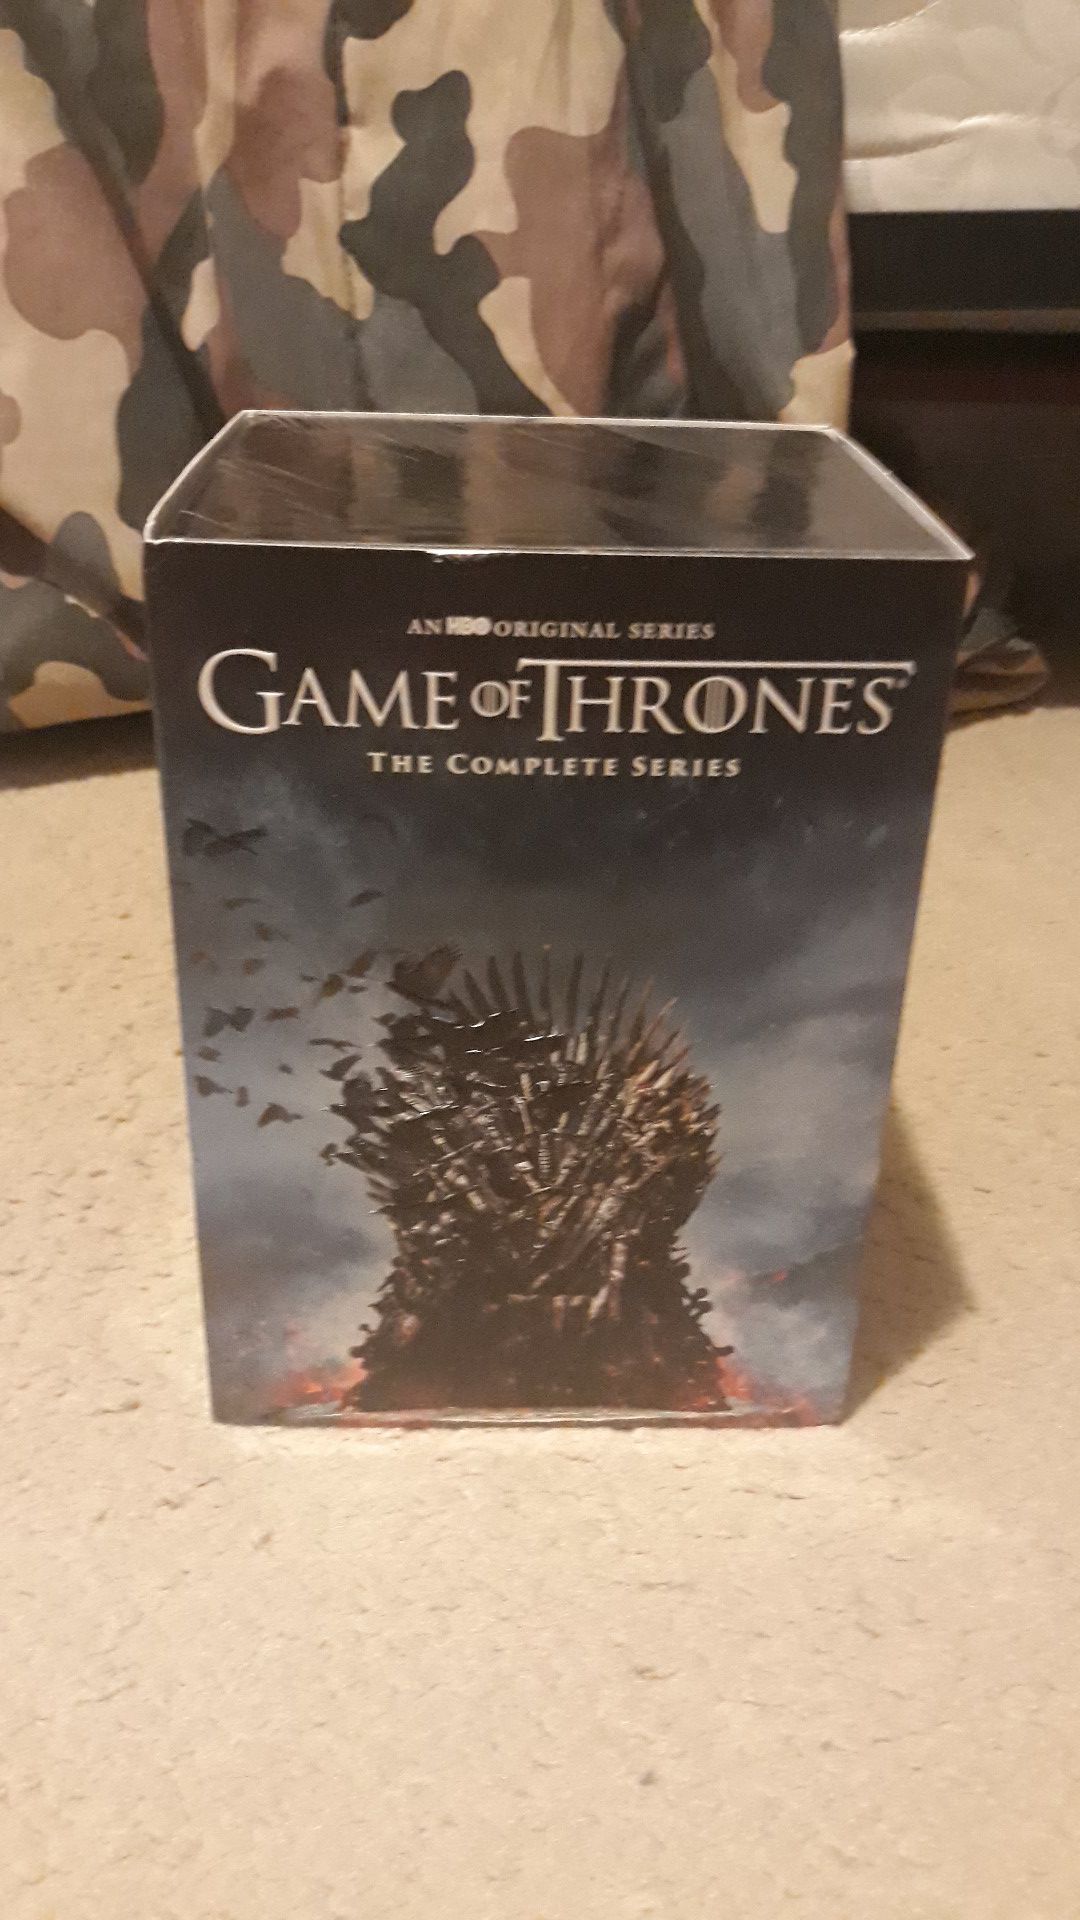 Game of Thrones Complete Series DVD